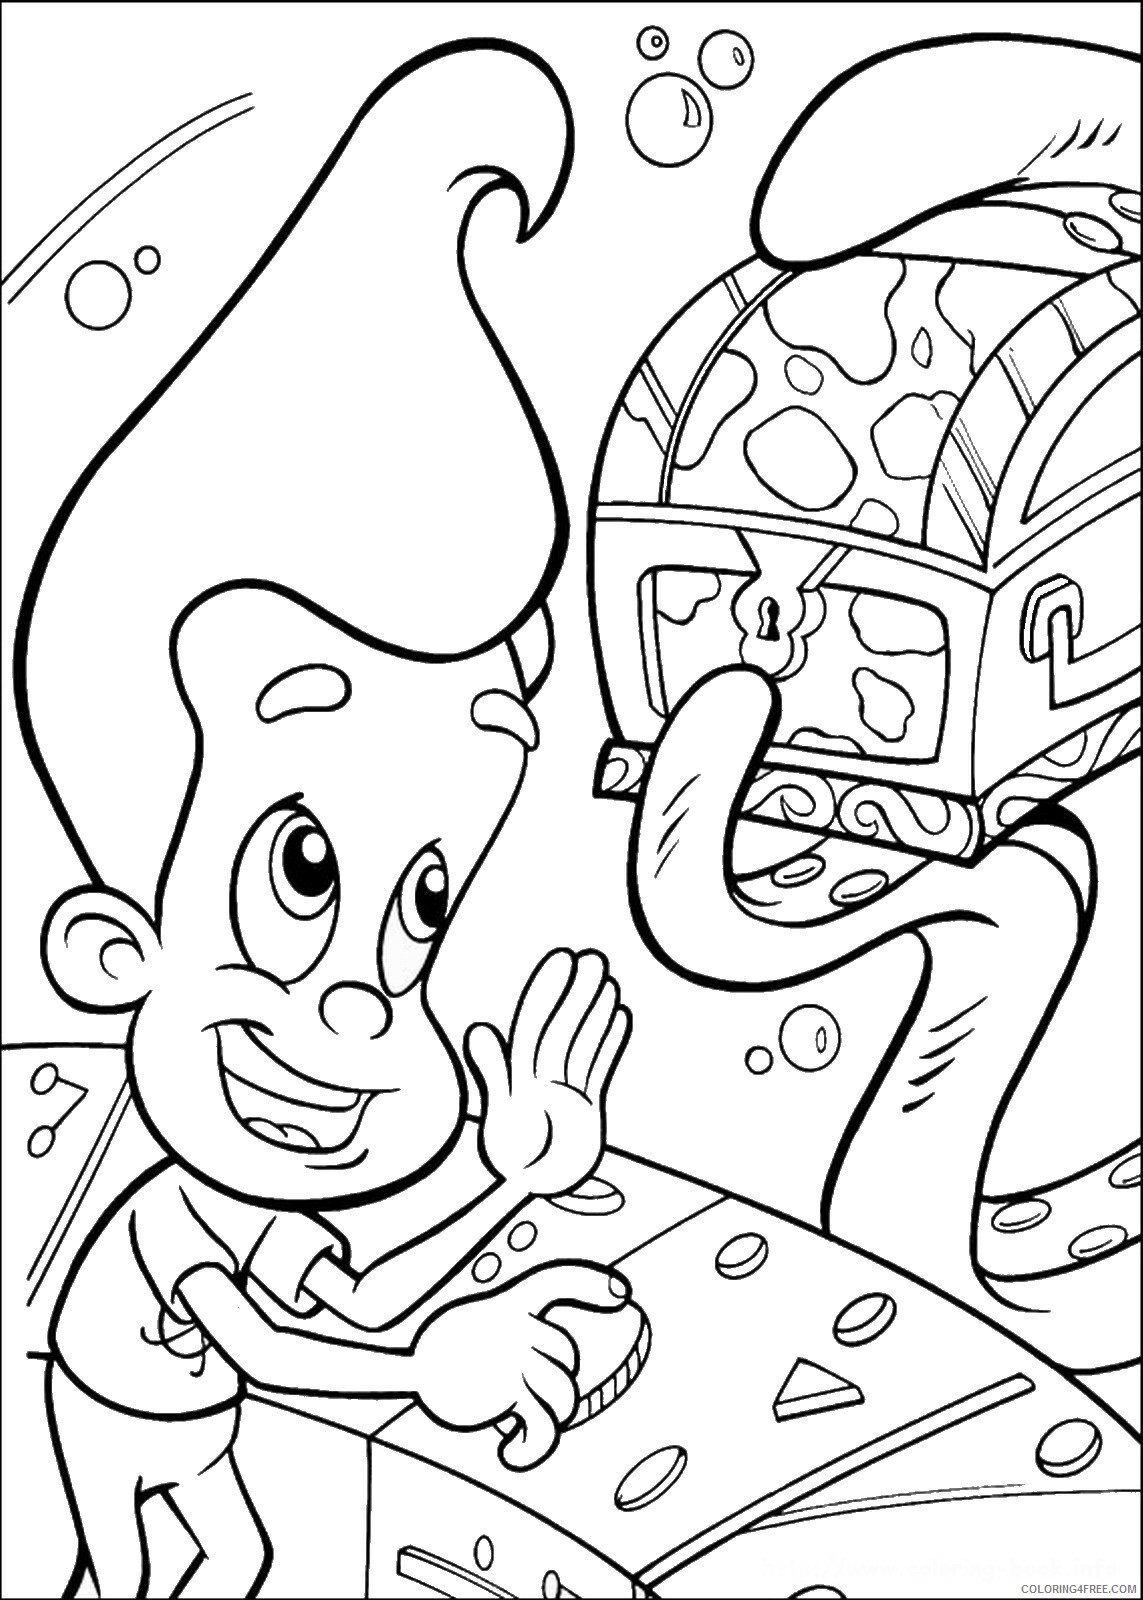 Jimmy Neutron Coloring Pages TV Film jimmy_neutron_cl15 Printable 2020 04133 Coloring4free